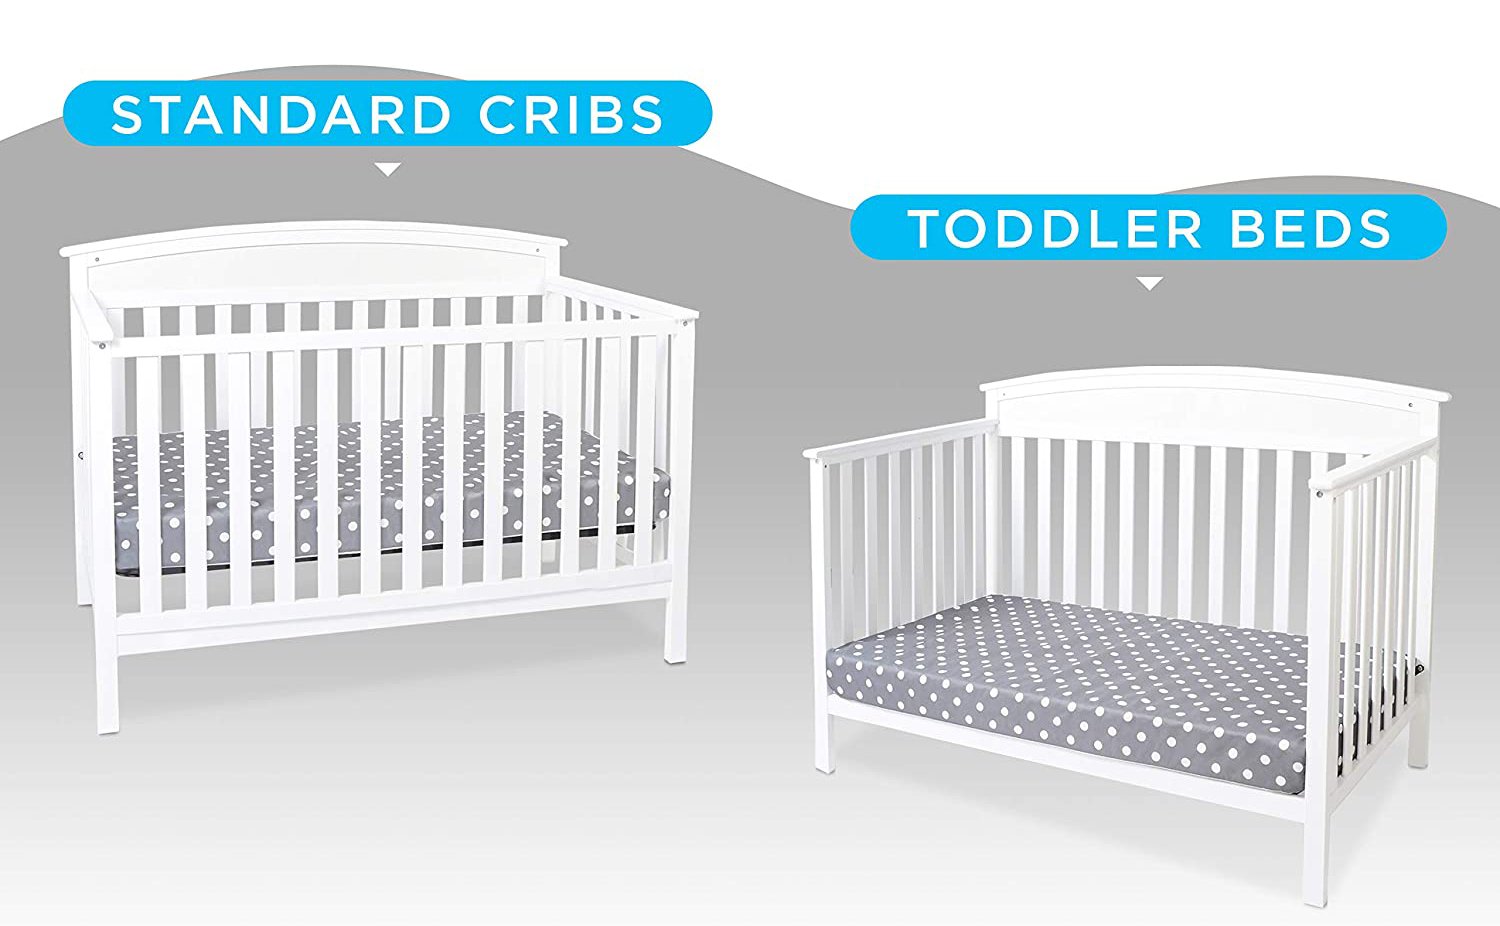 What Size Mattress Is Needed for a Toddler Bed?